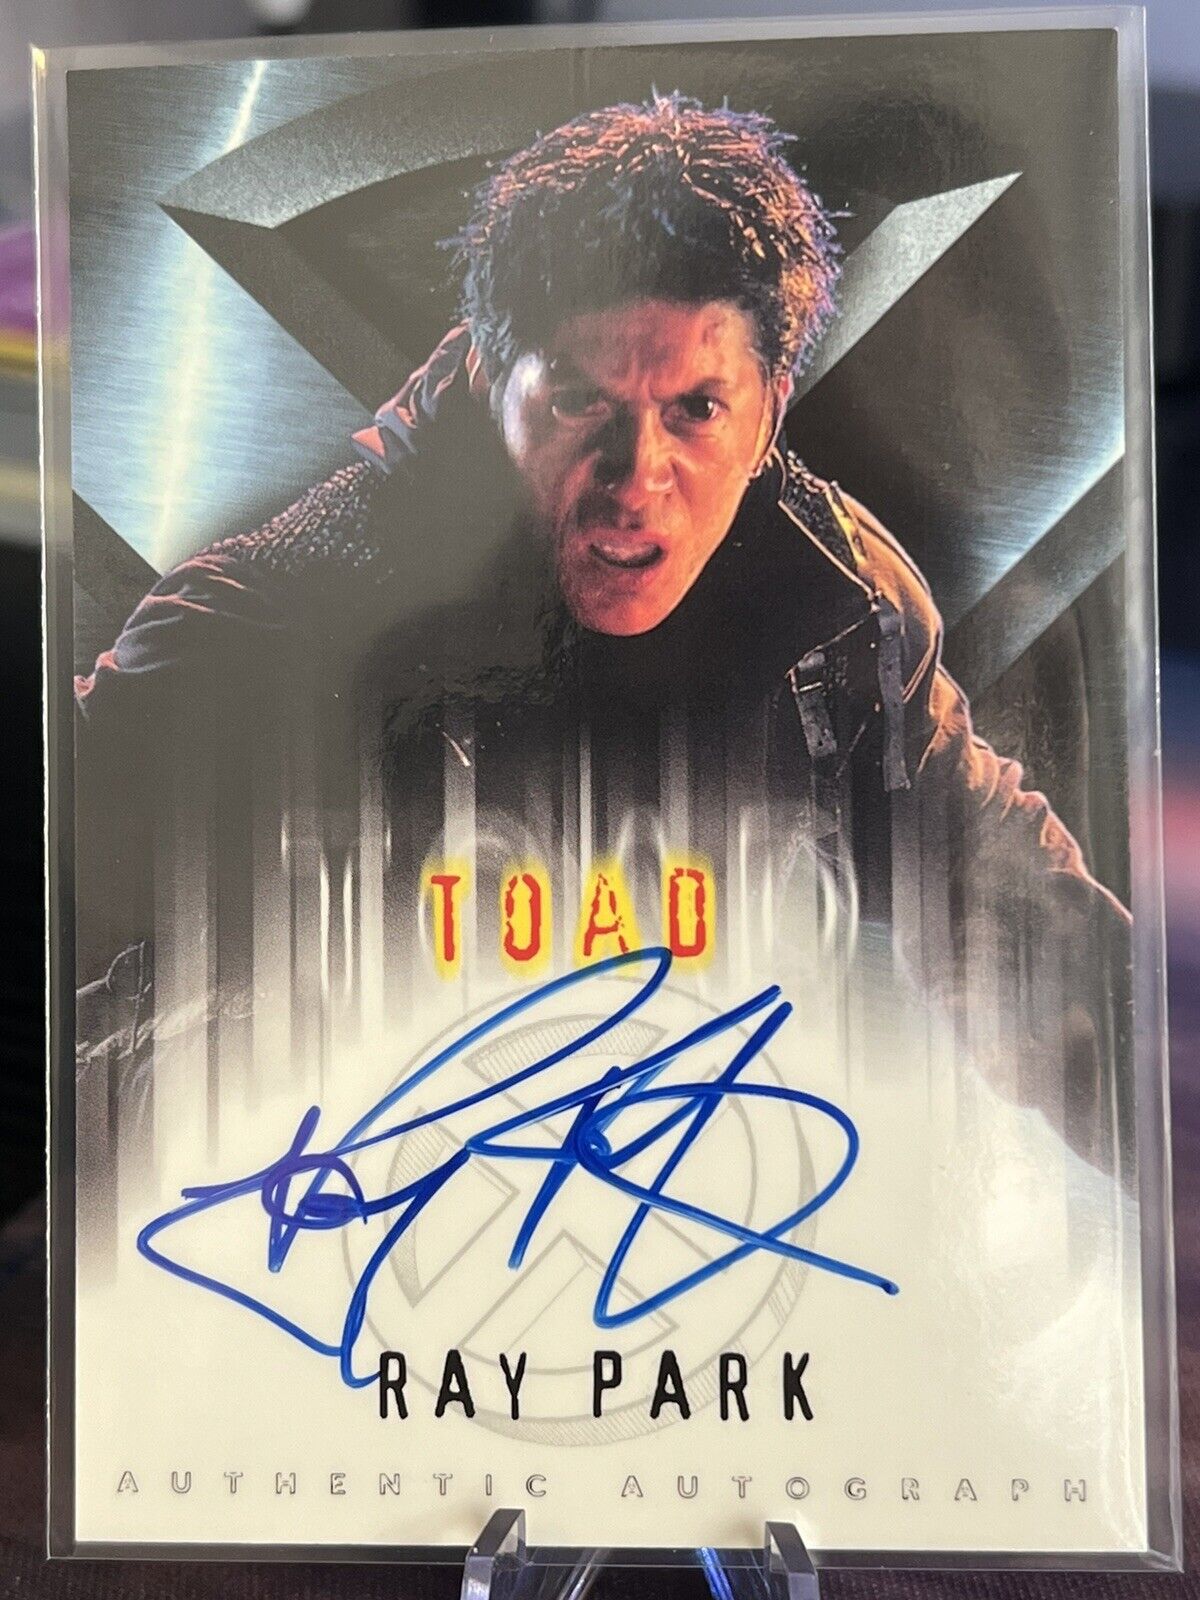 2000 Topps X-Men the Movie Authentic Autograph Ray Park as Toad Auto RARE